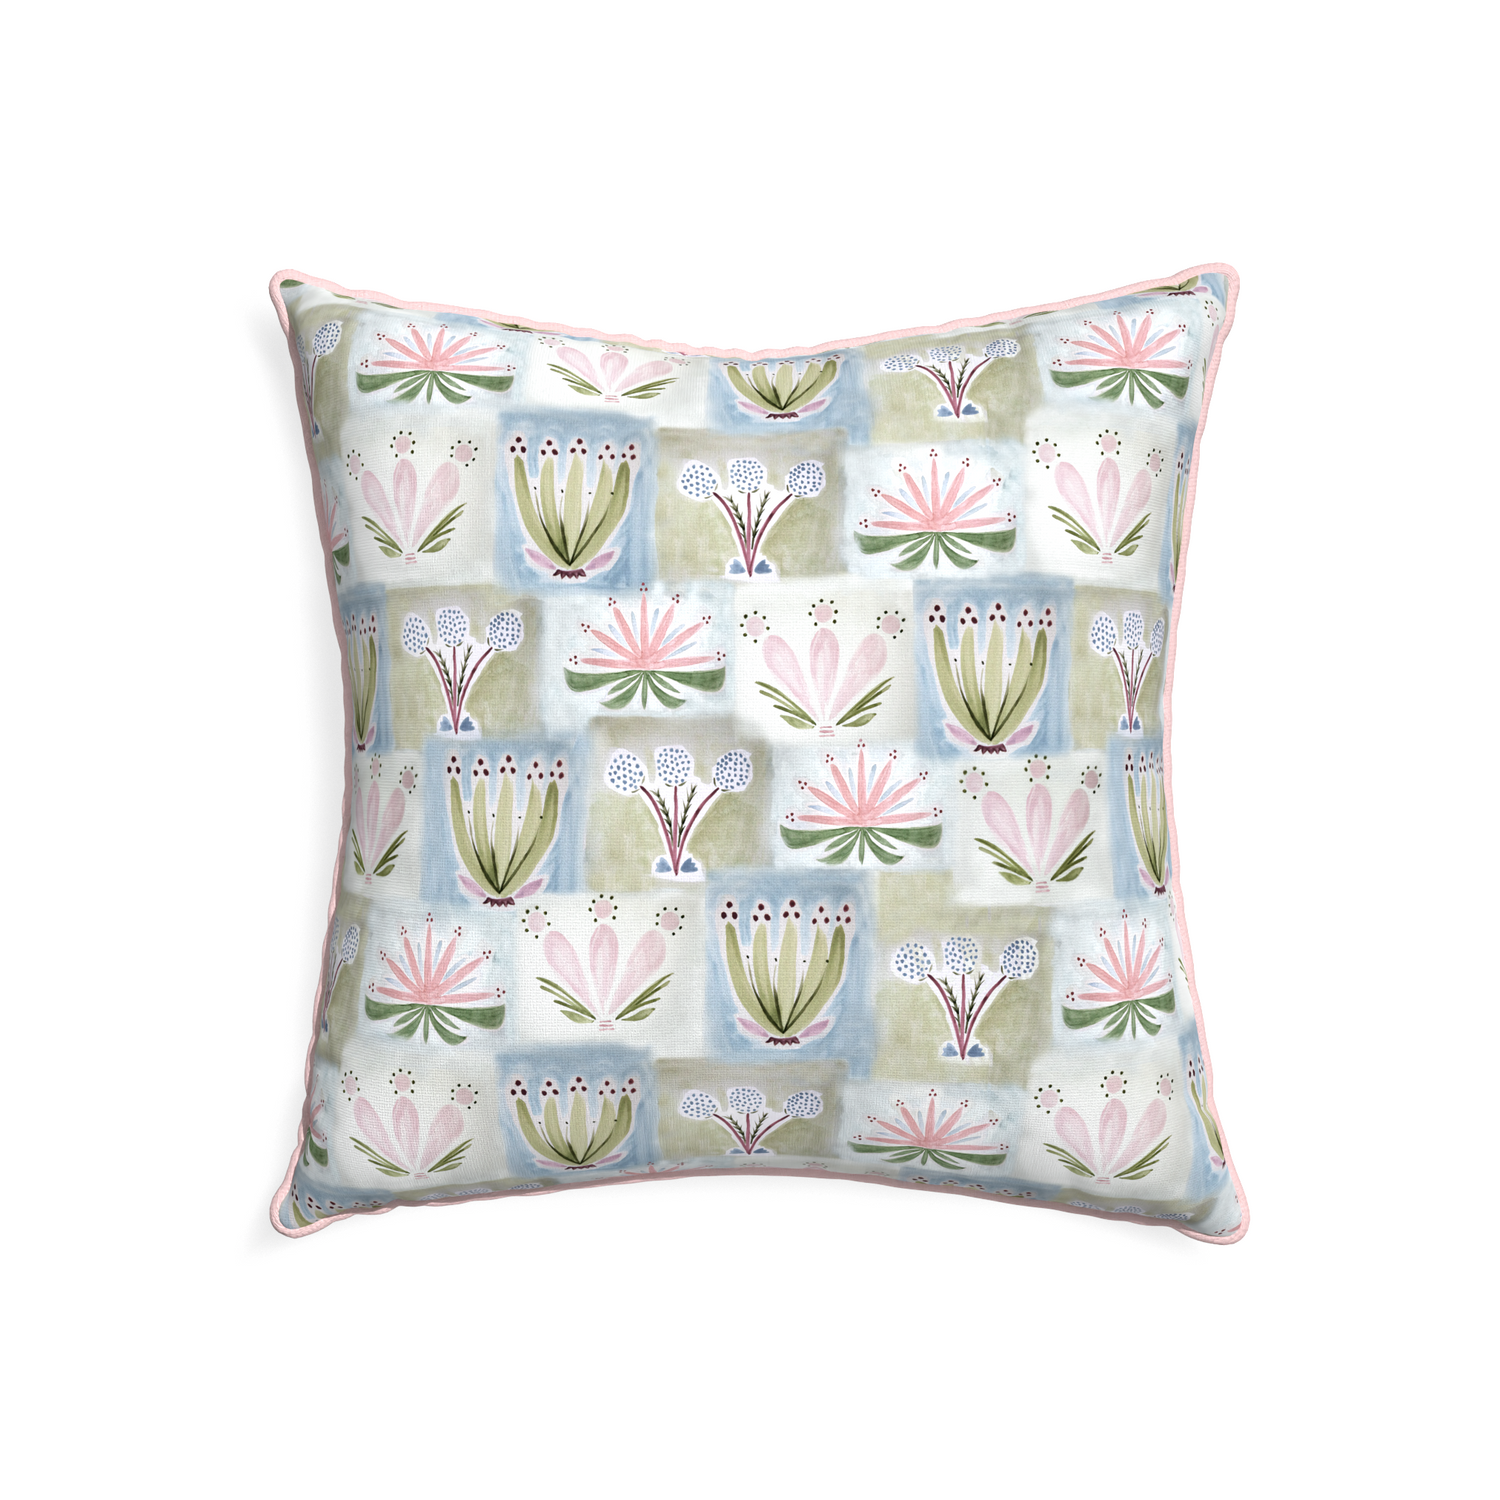 22-square harper custom hand-painted floralpillow with petal piping on white background